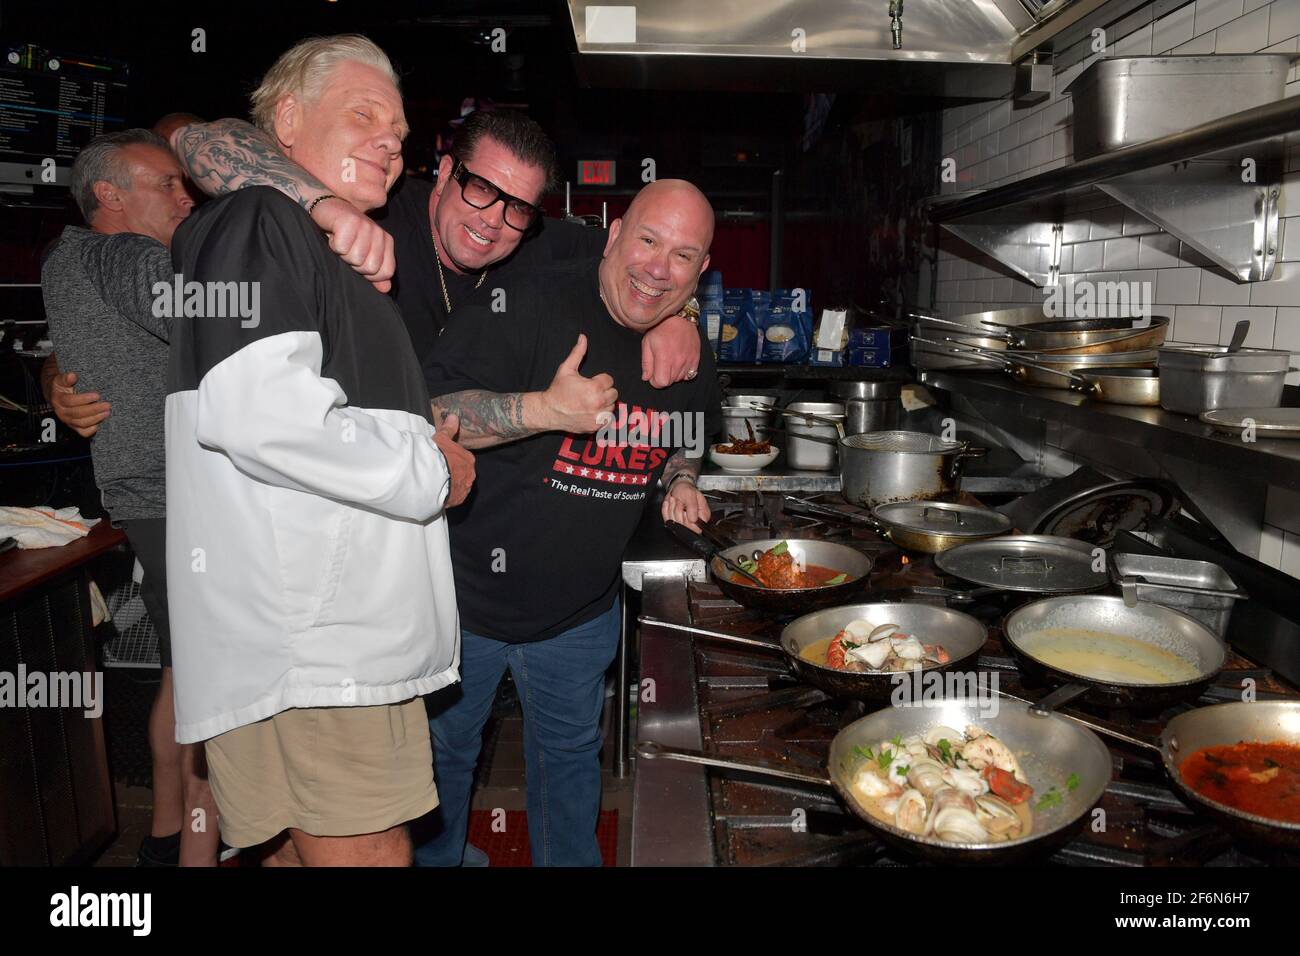 FORT LAUDERDALE; FL - APRIL 01: (NO SALES TO NEW YORK POST) (EXCLUSIVE COVERAGE) Gravesend Actors William Forsyth, Bruce Soscia, Tony Luke Jr of  Tony Luke's Cheese Steak and comedian Vic Dibitetto went into the kitchen to cook with fellow Actor, cook and Owner Steve Martorano The “Godfather of Italian-American cooking” on April 1, 2021 At Cafe Martorano in Fort Lauderdale, Florida  People:  William Forsyth, Bruce Soscia,Tony Luke Credit: Storms Media / MediaPunch Stock Photo